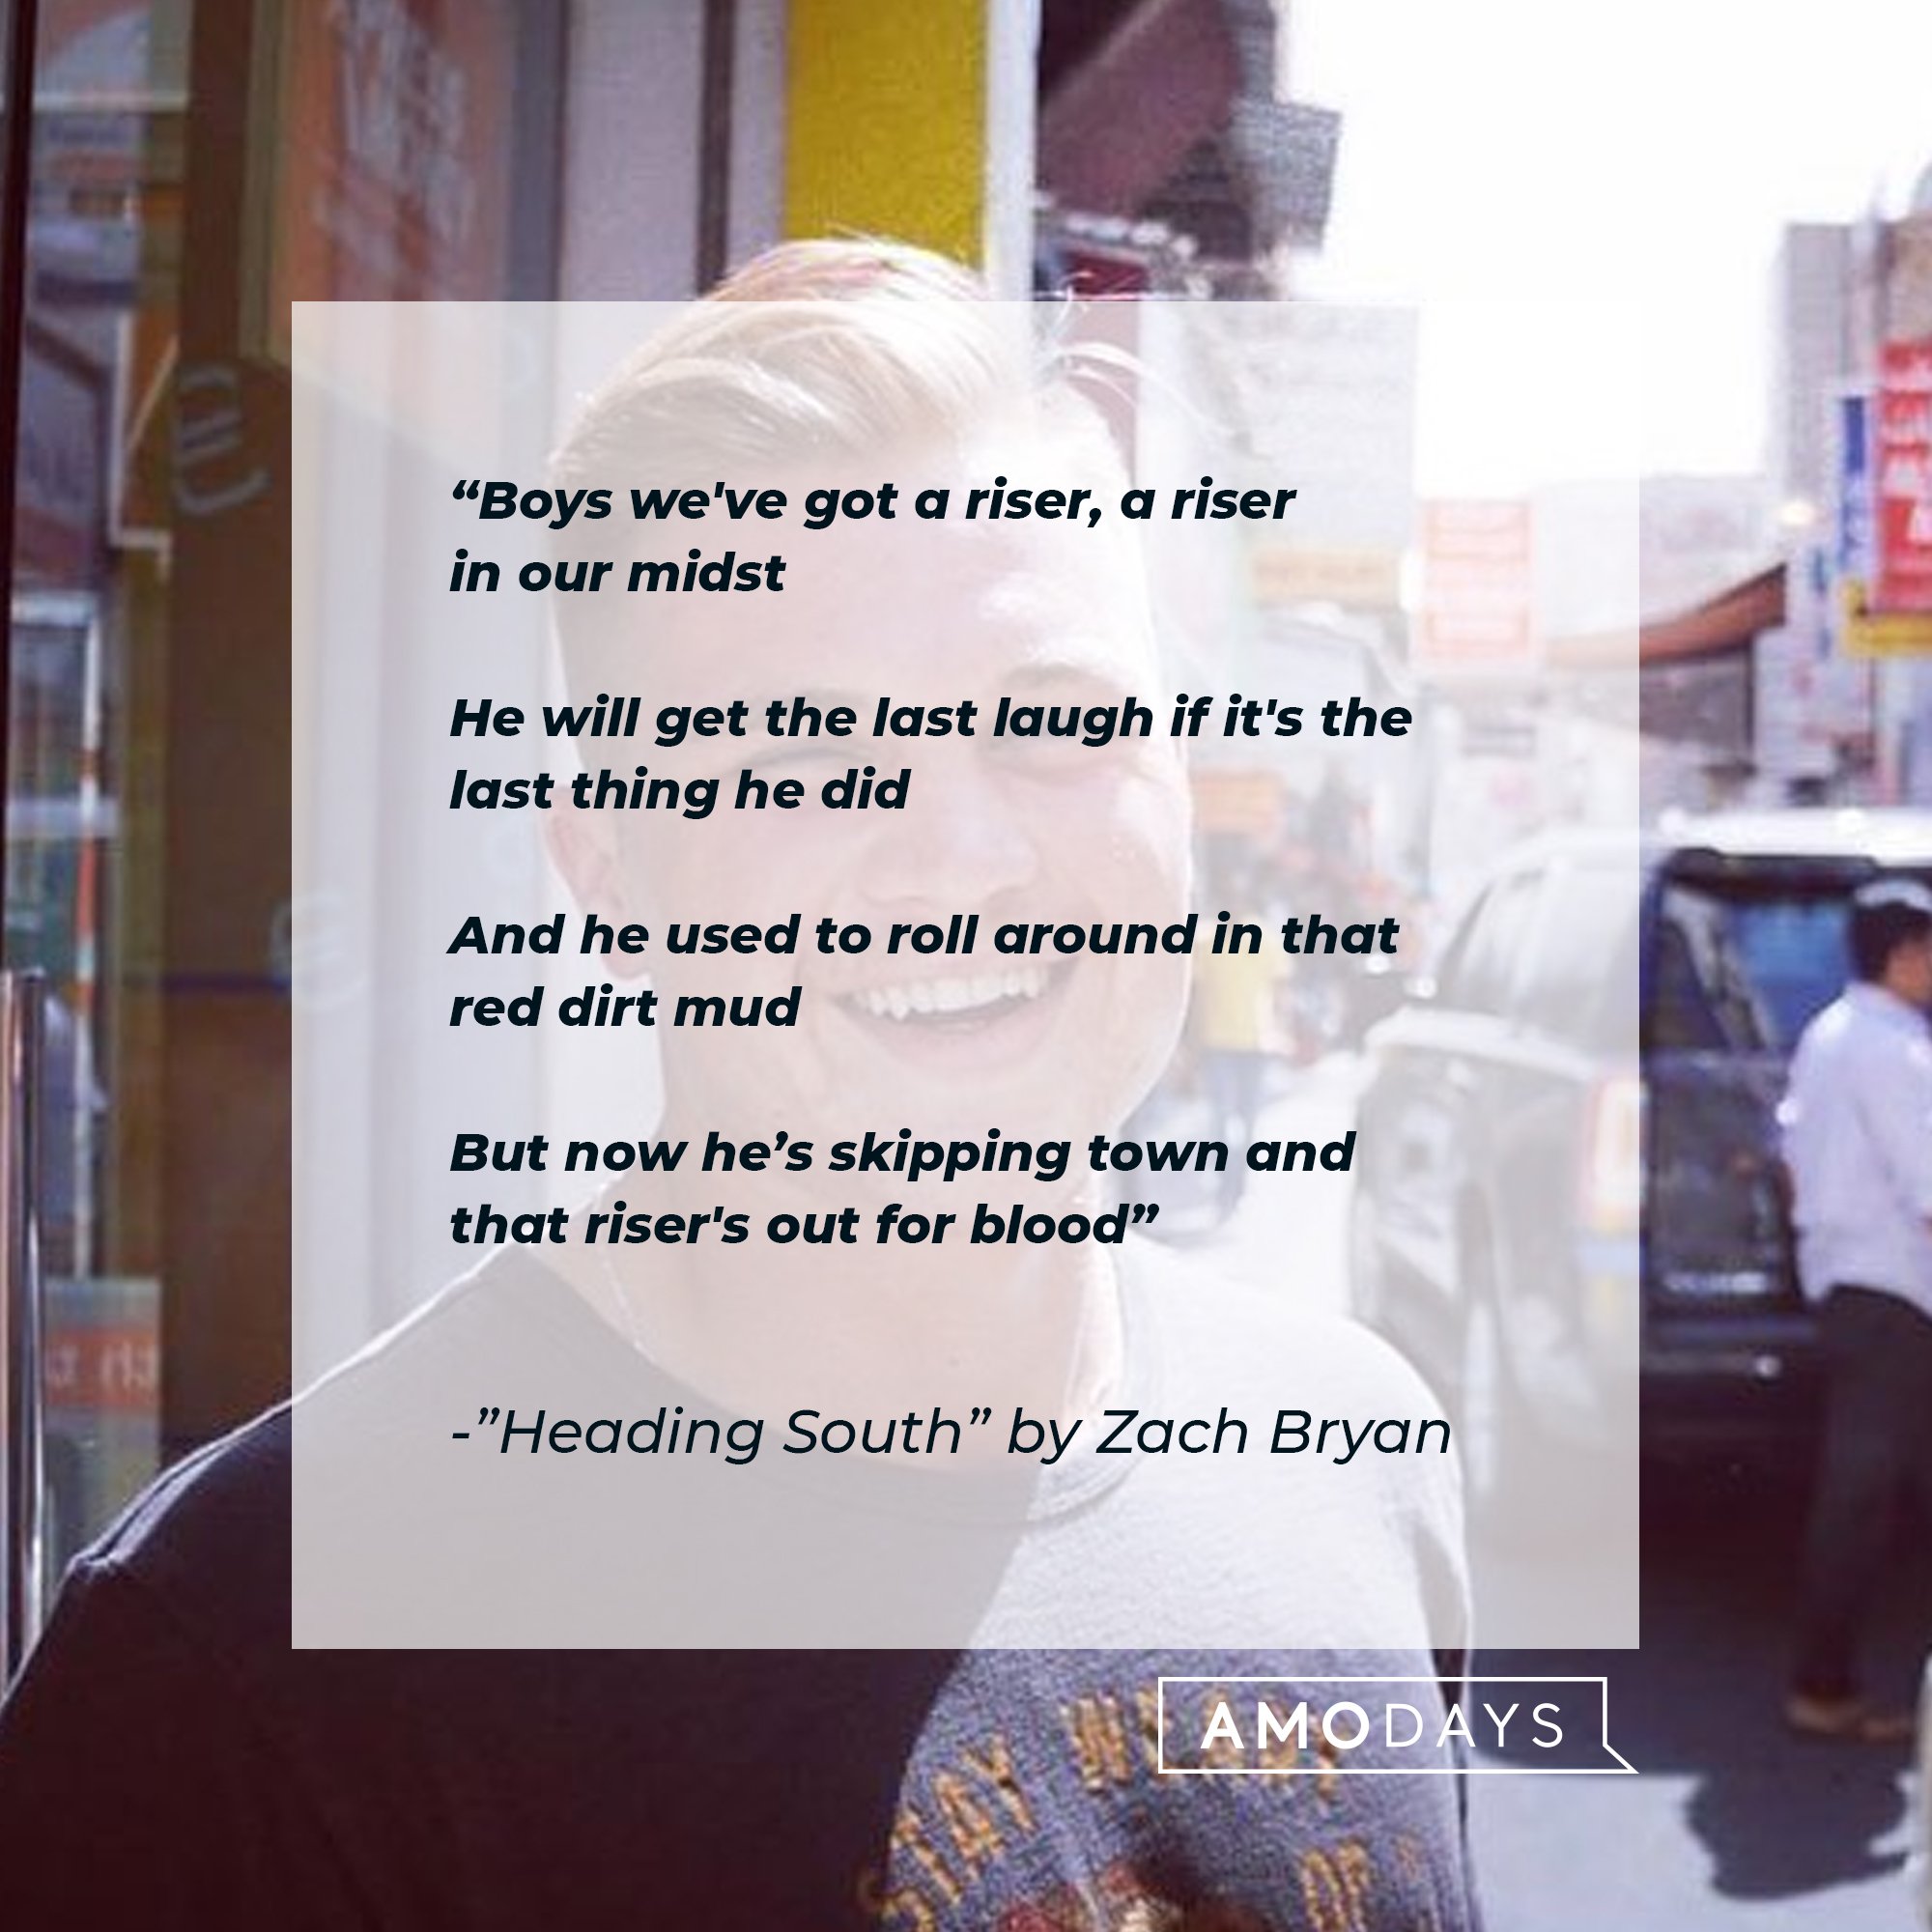 Zach Bryan's lyrics from "Heading South": "Boys we've got a riser, a riser in our midst/ He will get the last laugh if it's the last thing he did/ And he used to roll around in that red dirt mud/But now he’s skipping town and that riser's out for blood” | Image: AmoDays